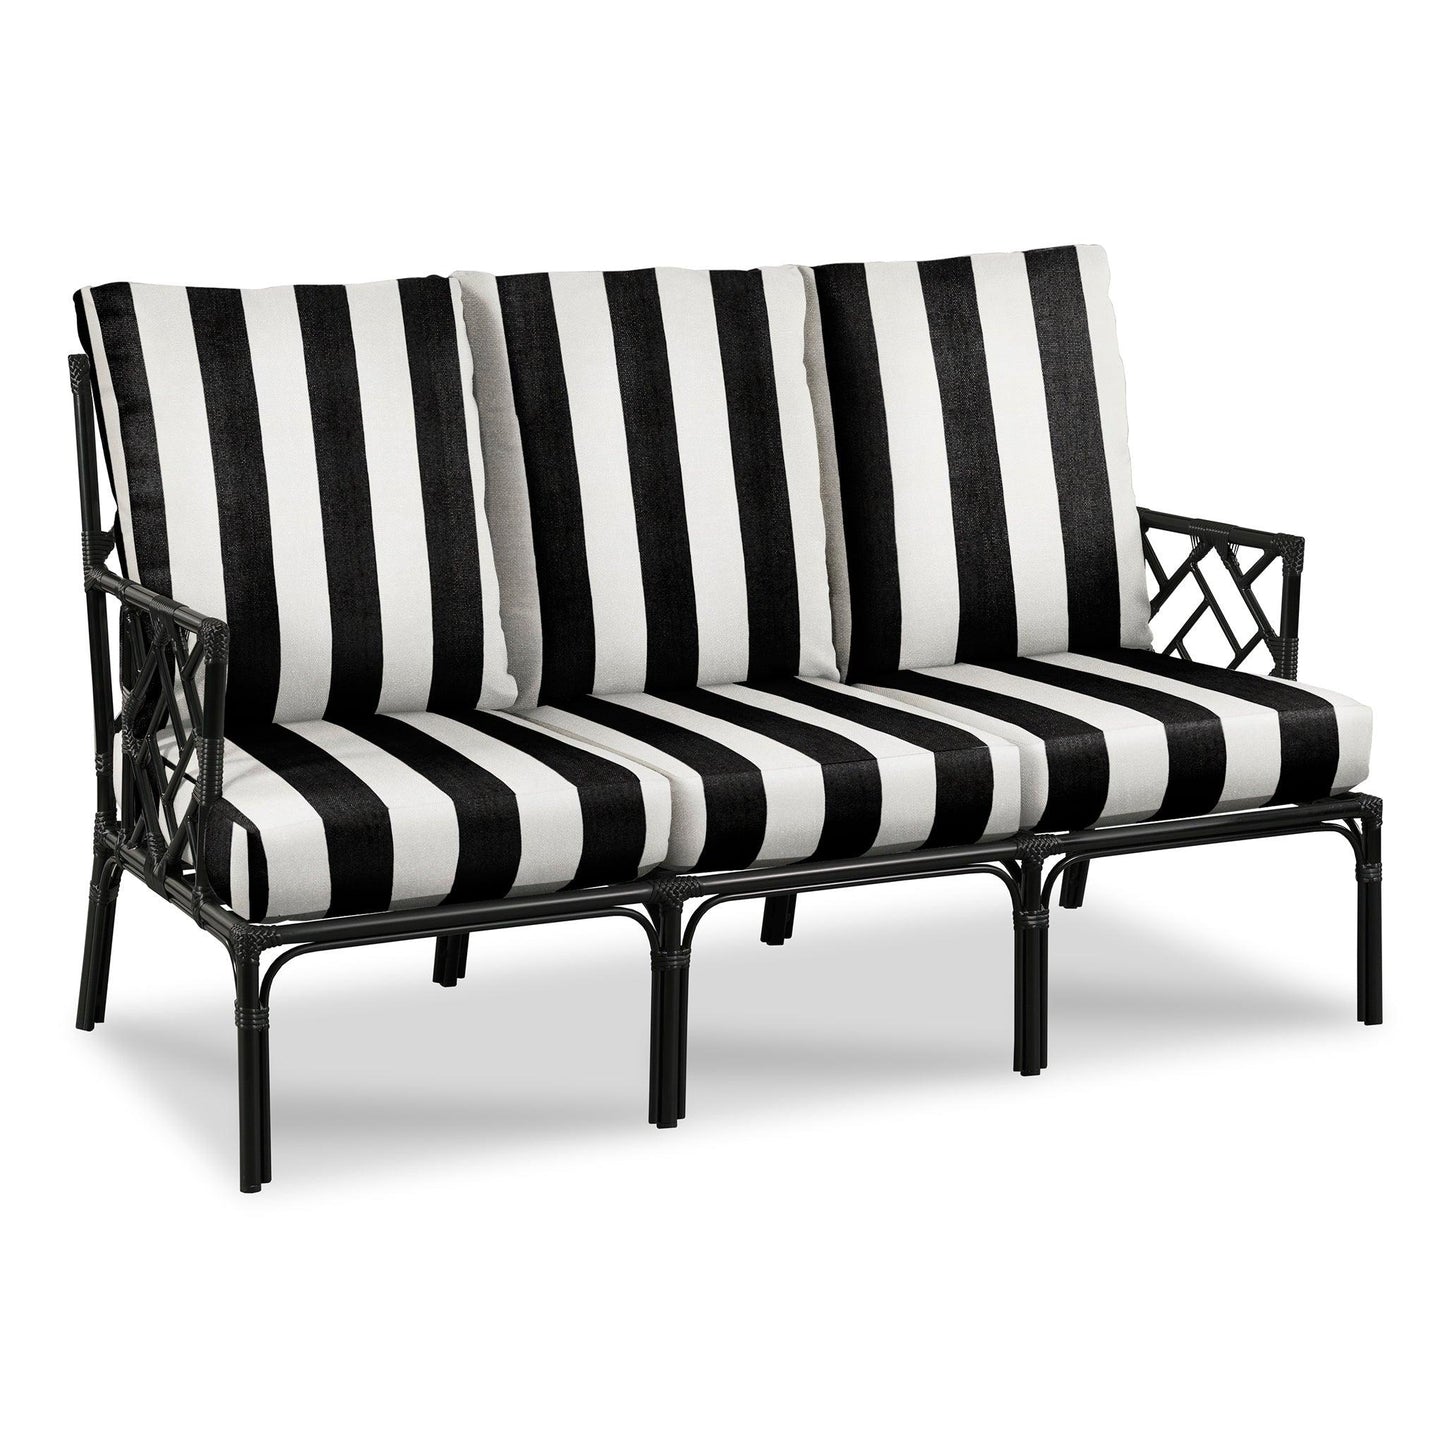 Carlyle Outdoor Sofa - Fairley Fancy 